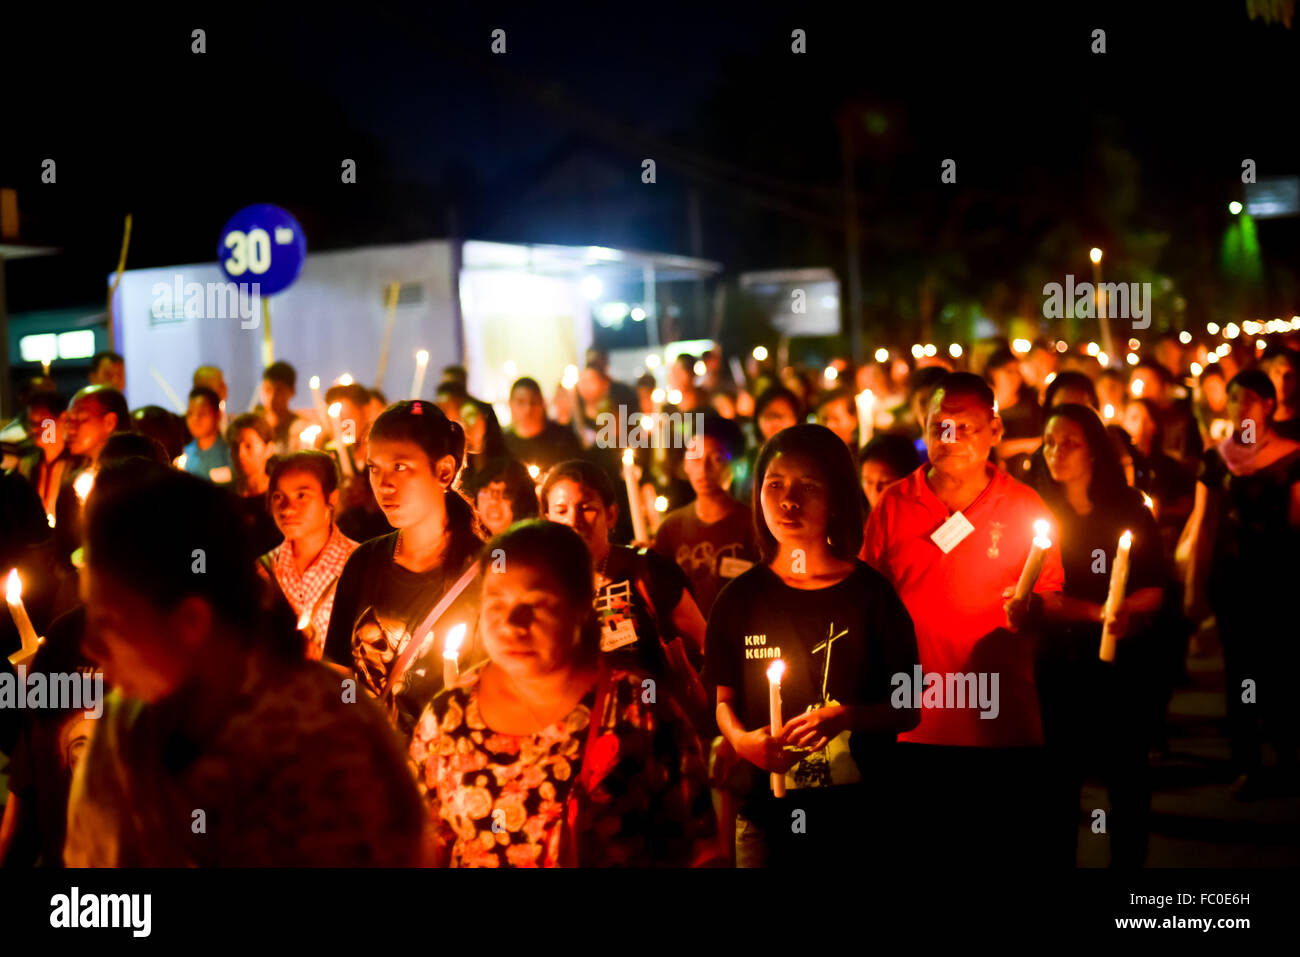 Catholic pilgrims walk together with lit candles in holy week procession in Larantuka, Indonesia. Stock Photo